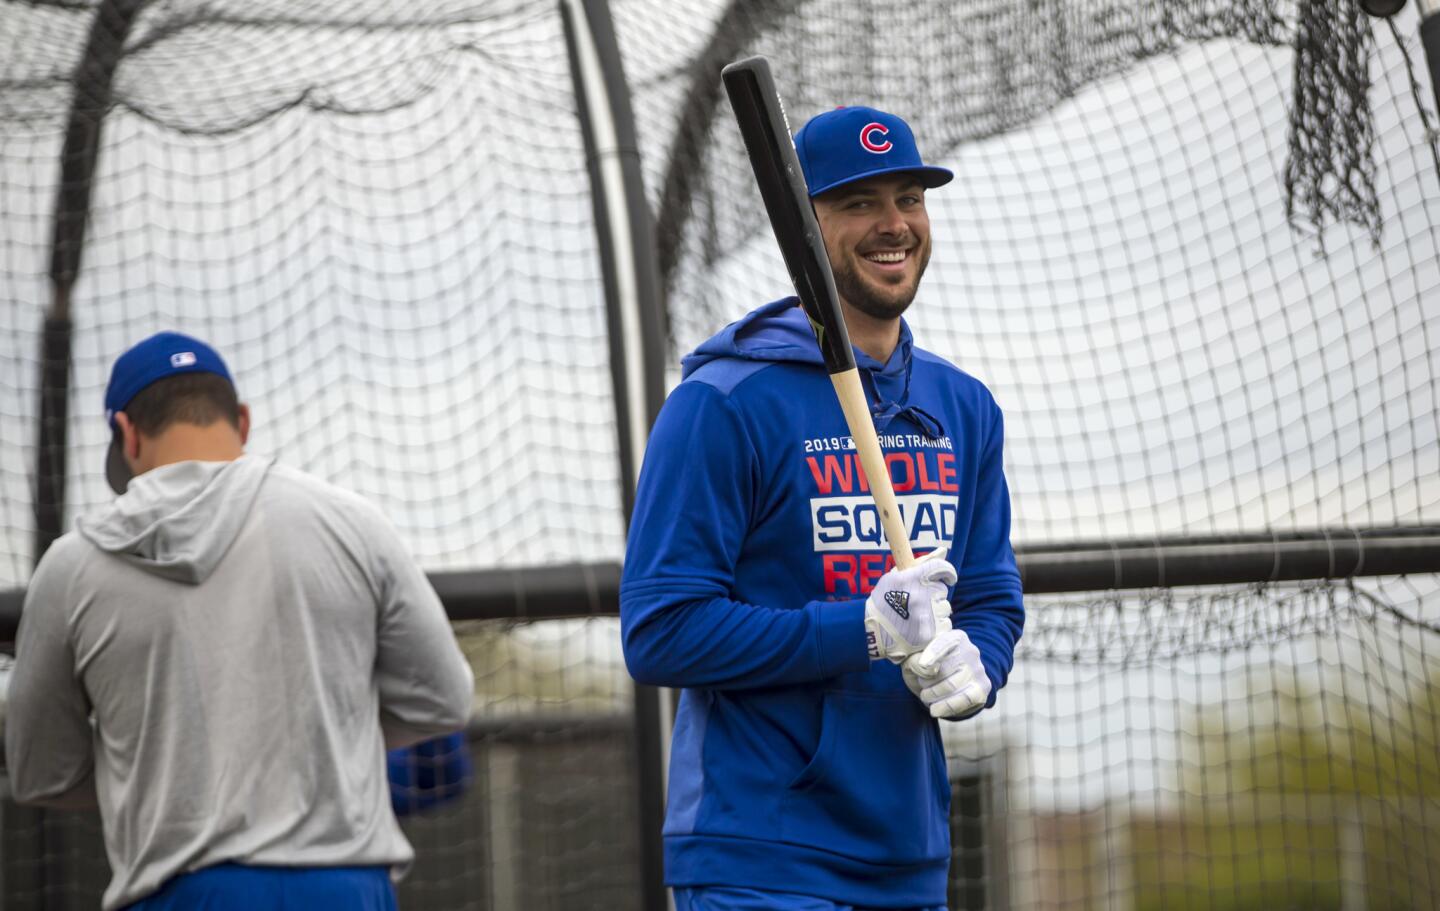 Cubs third baseman Kris Bryant works out during batting practice at spring training at Sloan Park in Mesa, Ariz., on Wednesday, Feb. 13, 2019.